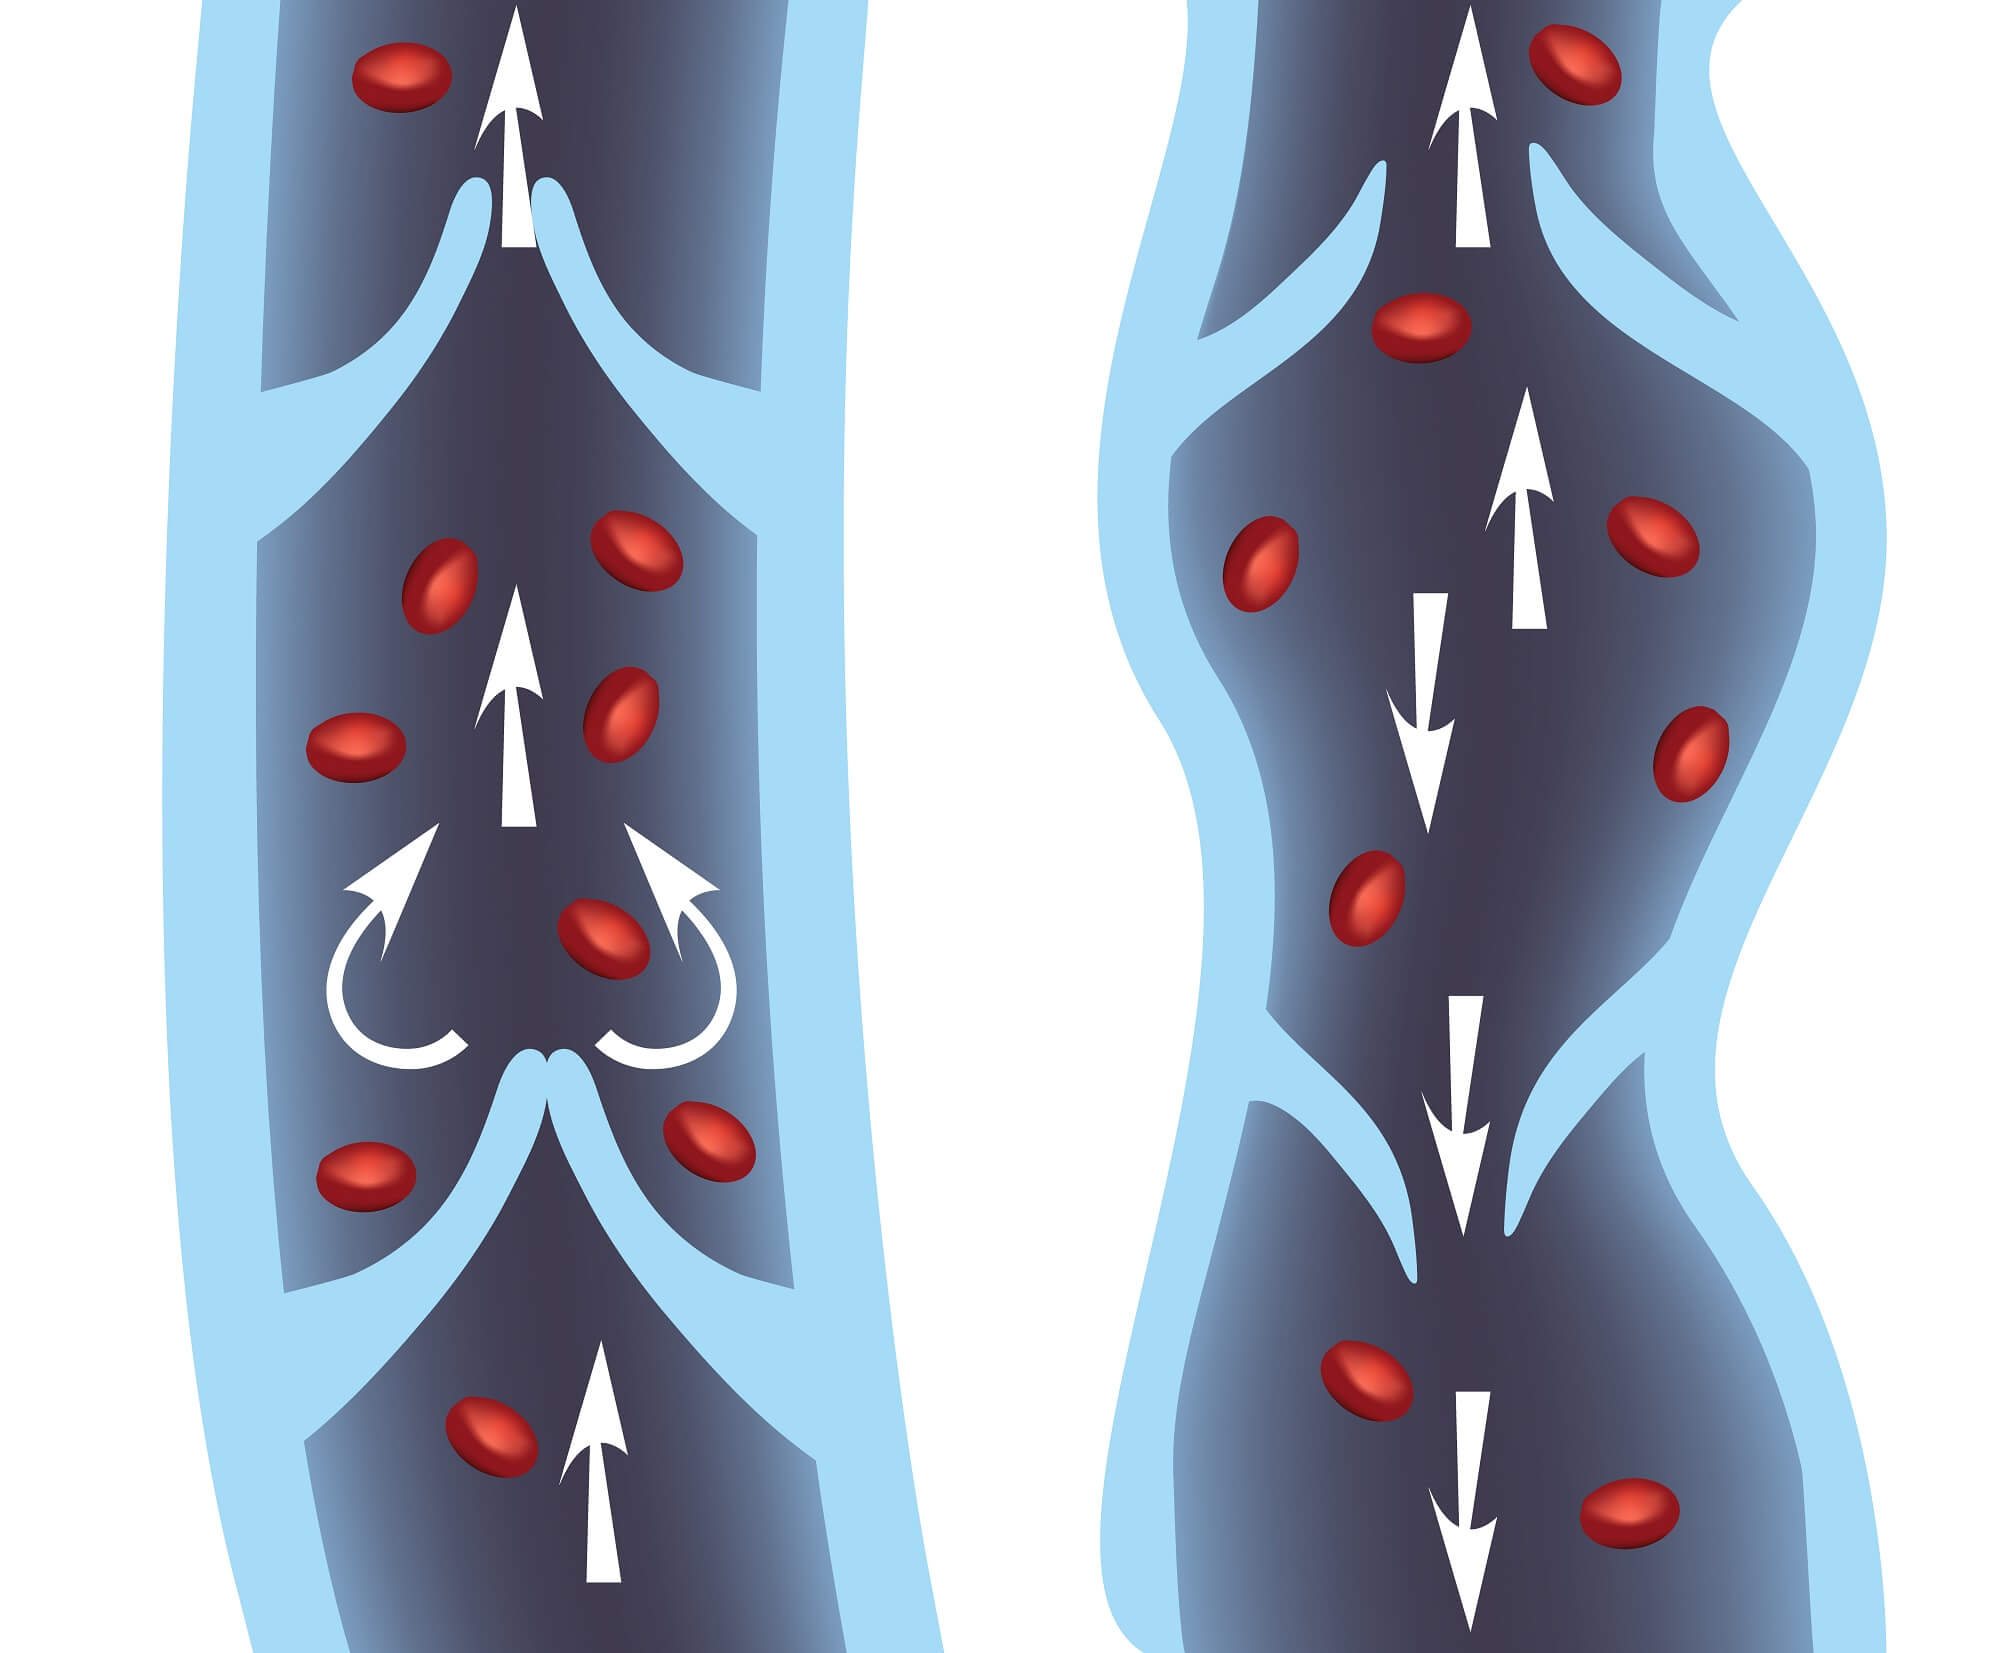 Diagram of normal vein and a Diagram of a varicose vein.